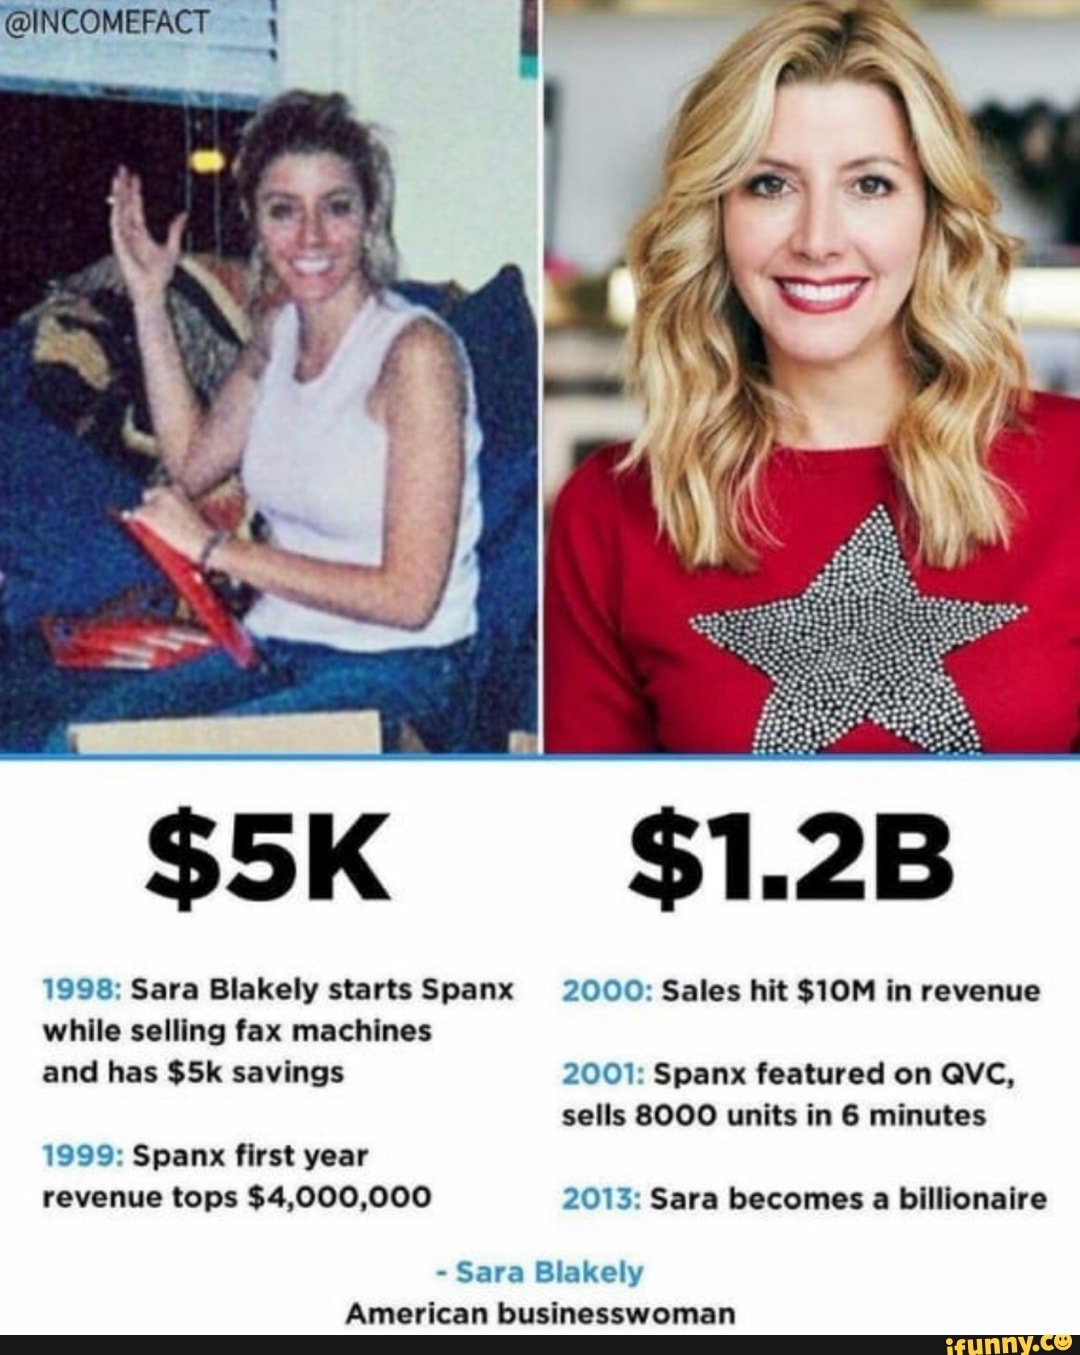 1998: Sara Blakely starts 2000: Sales hit SIOM in revenue @INCOMEFACT selling